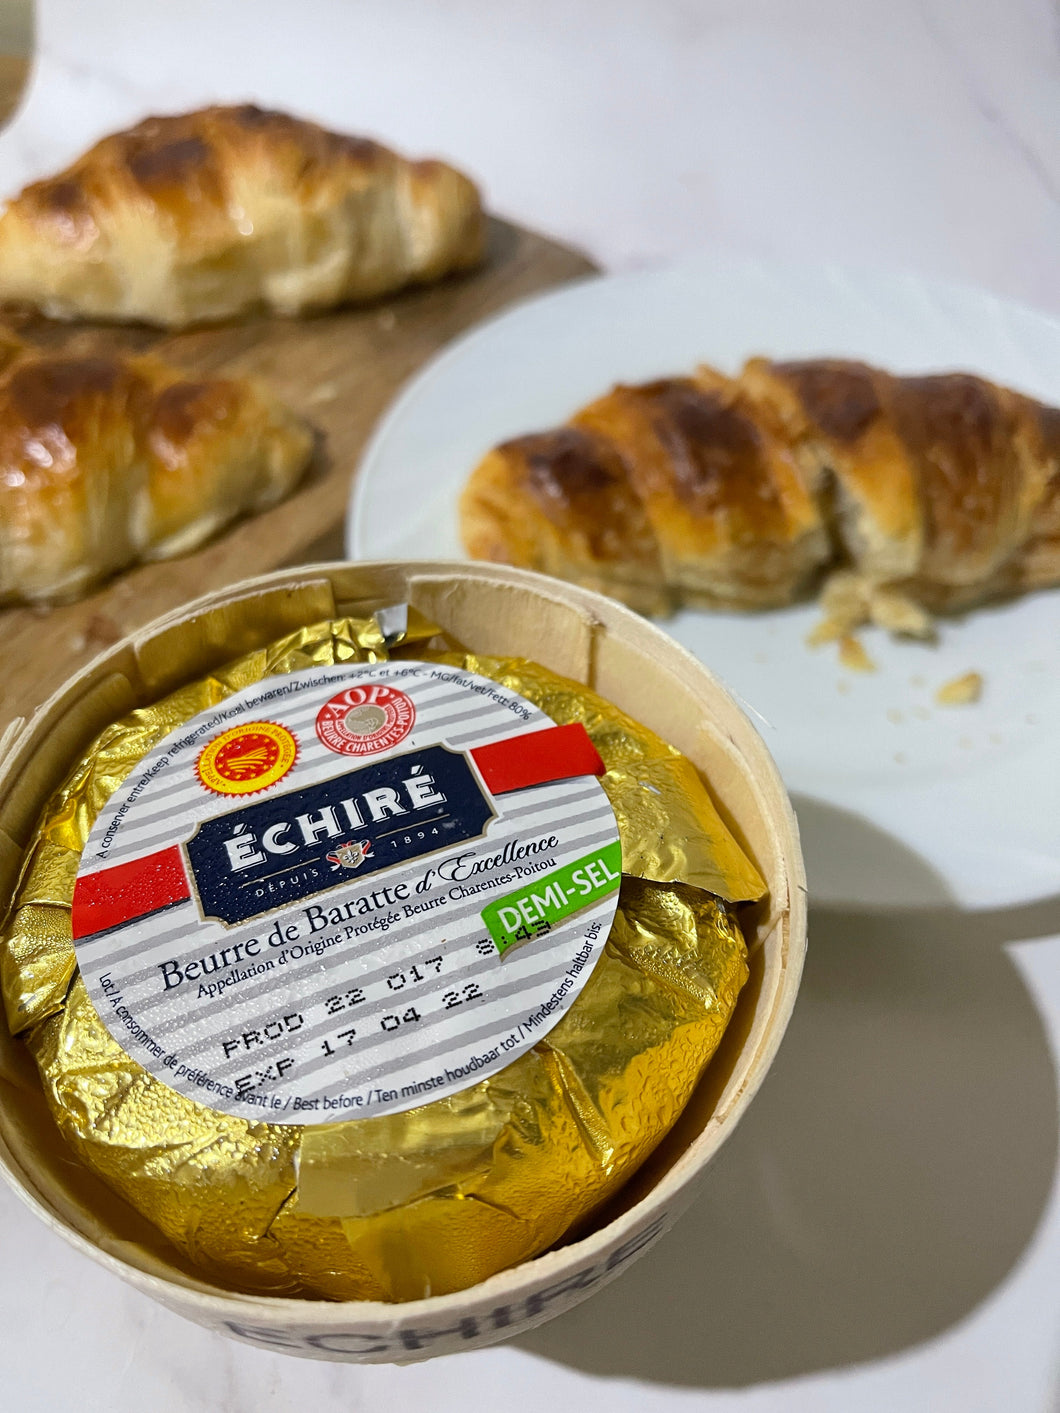 Echire AOP butter in basket, semi-salted 250g.